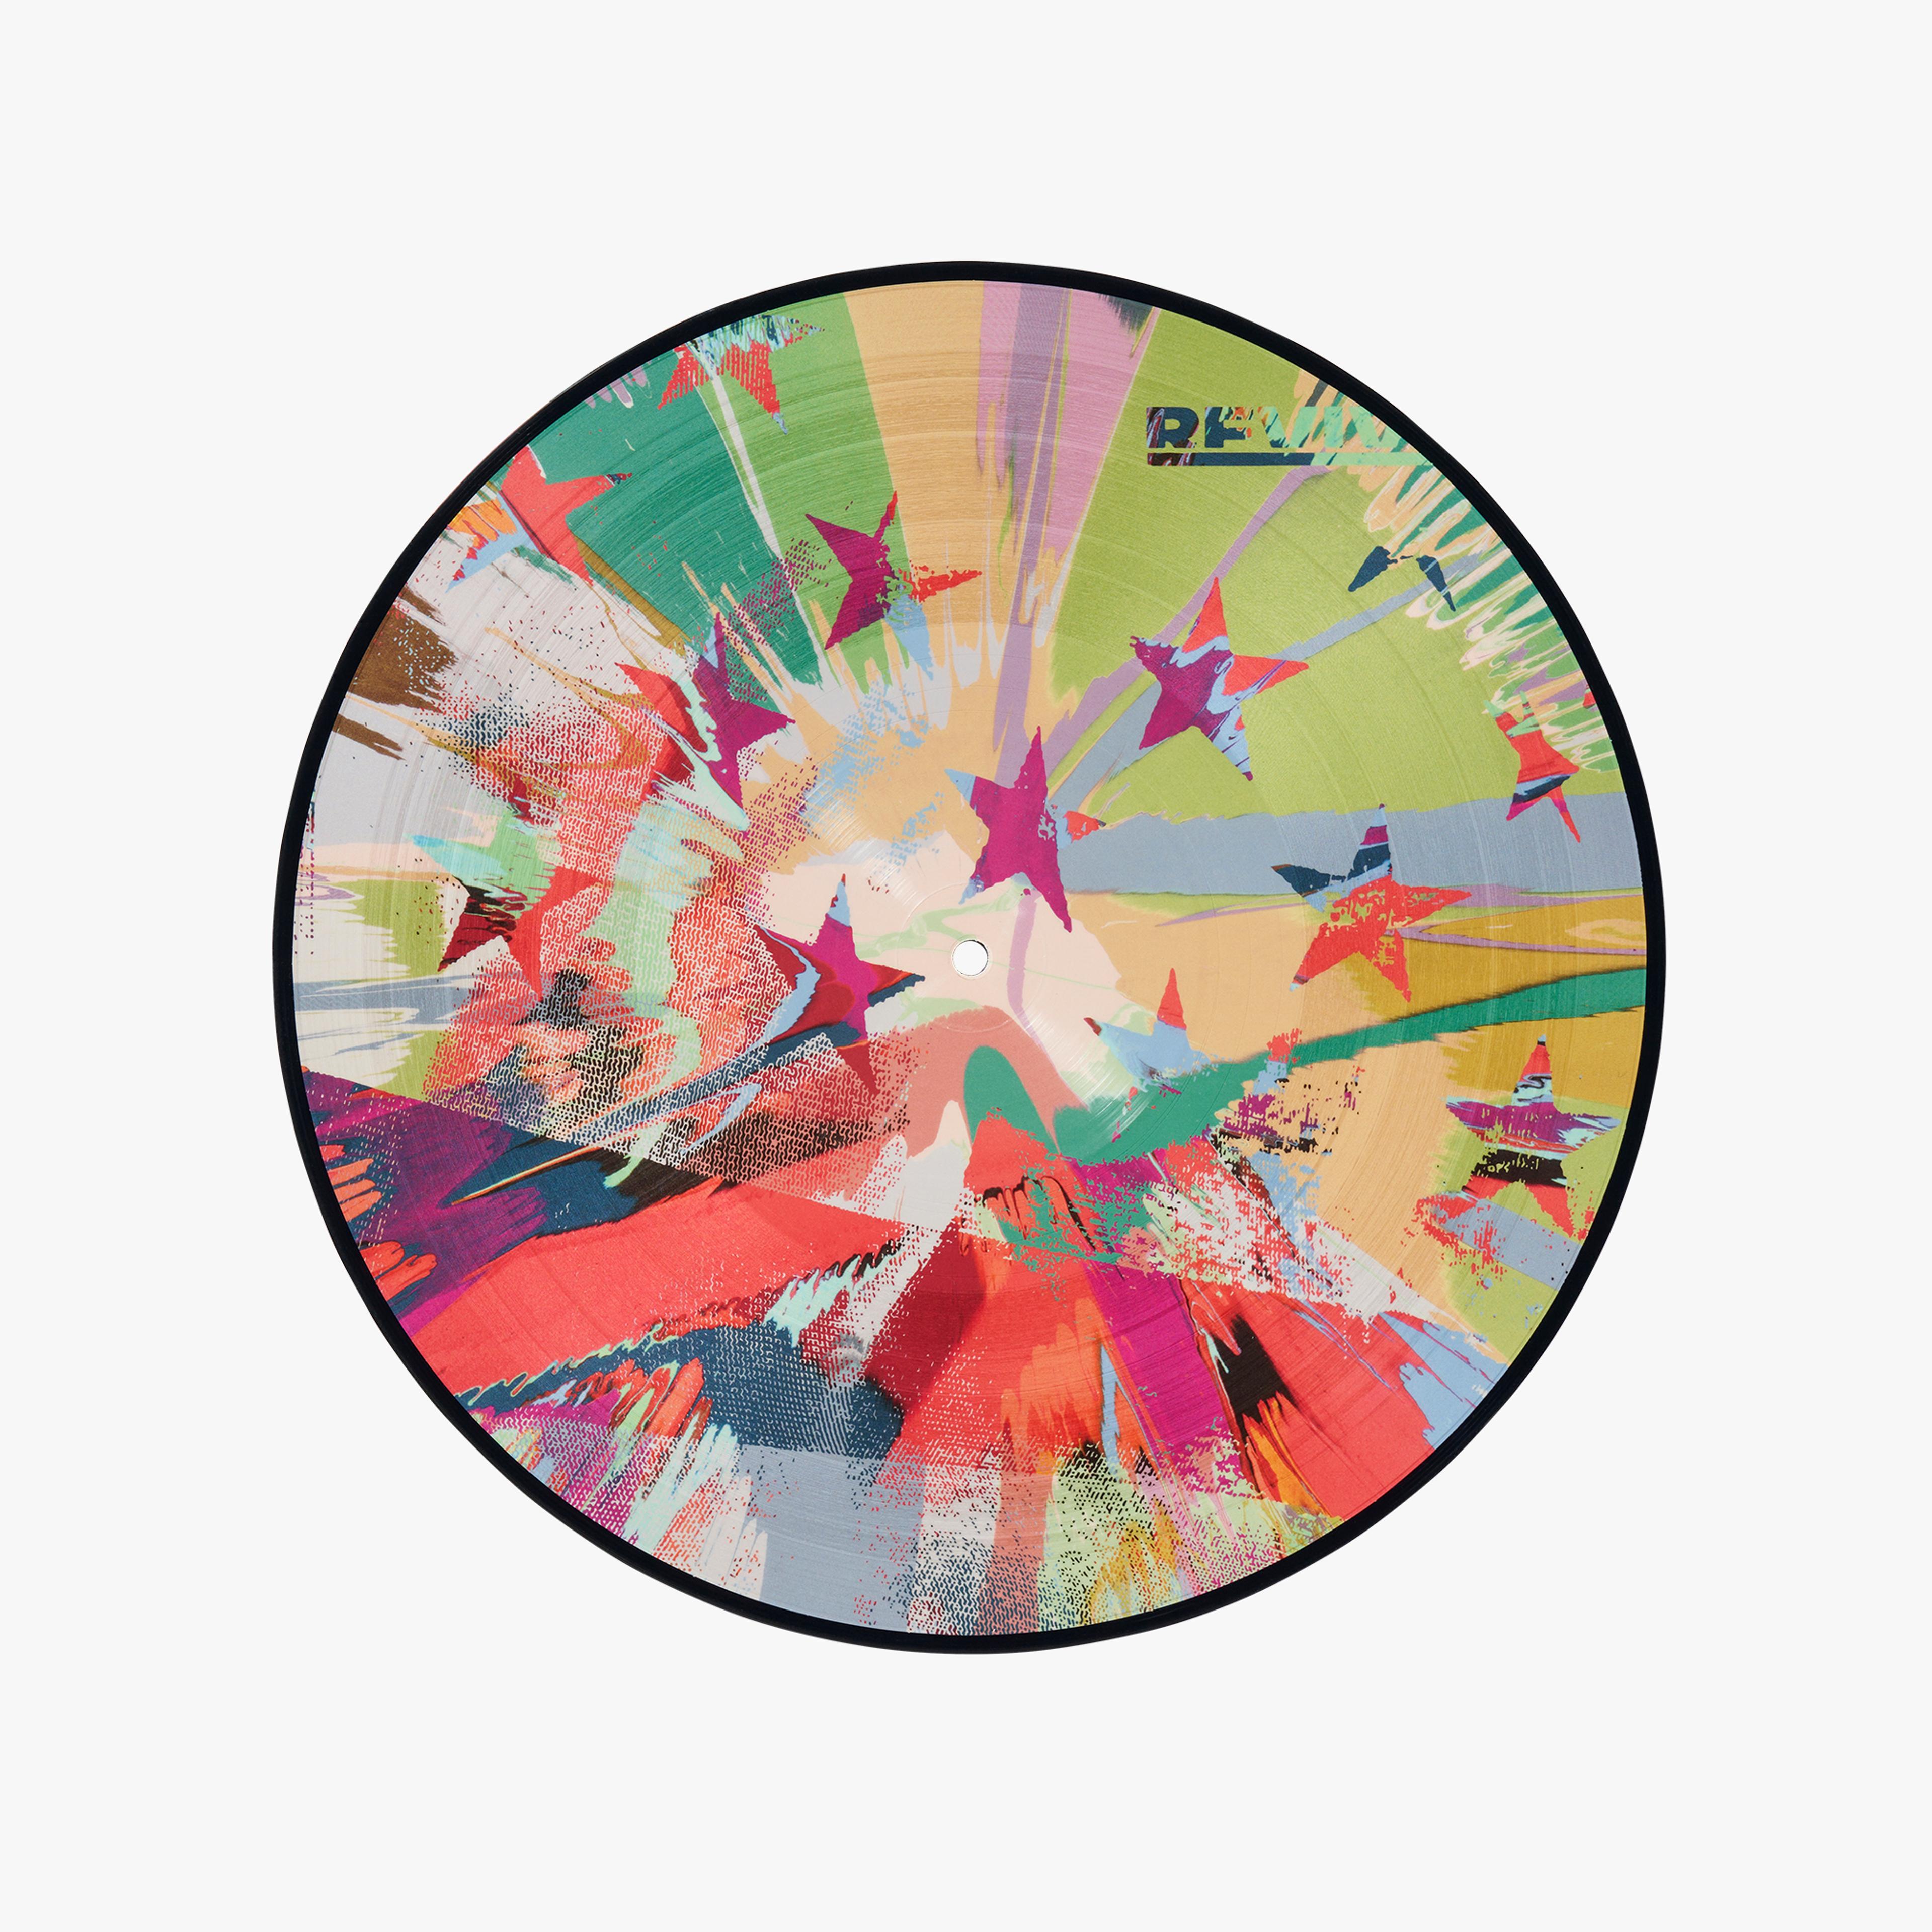 Alternate View 2 of Eminem - Revival by Damien Hirst Gallery Picture Disc